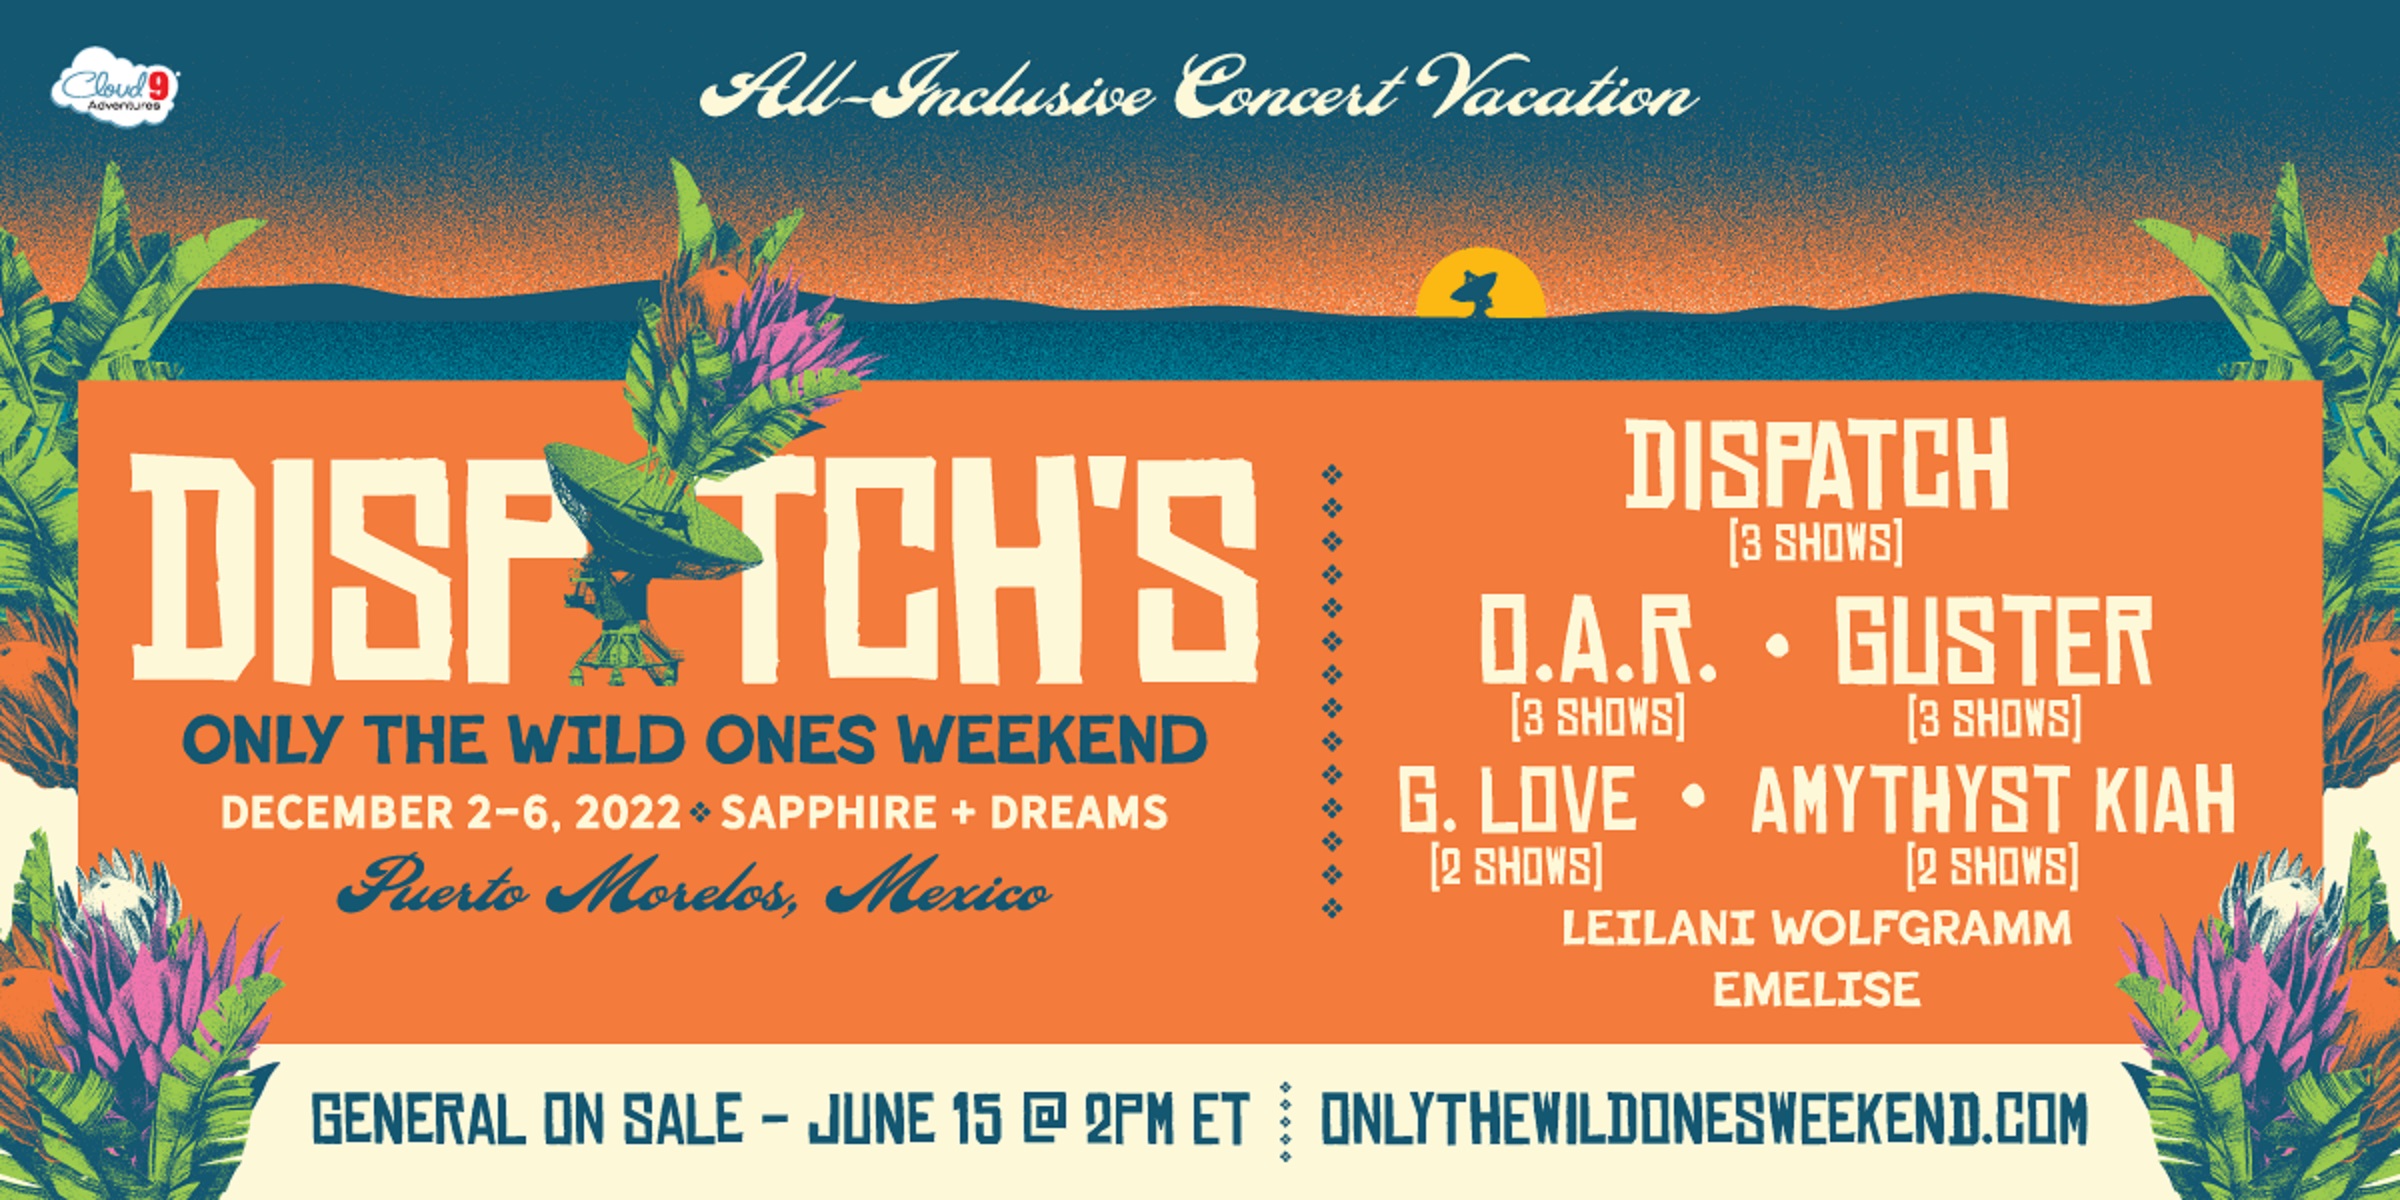 DISPATCH's Only The Wild Ones Weekend Concert Vacation